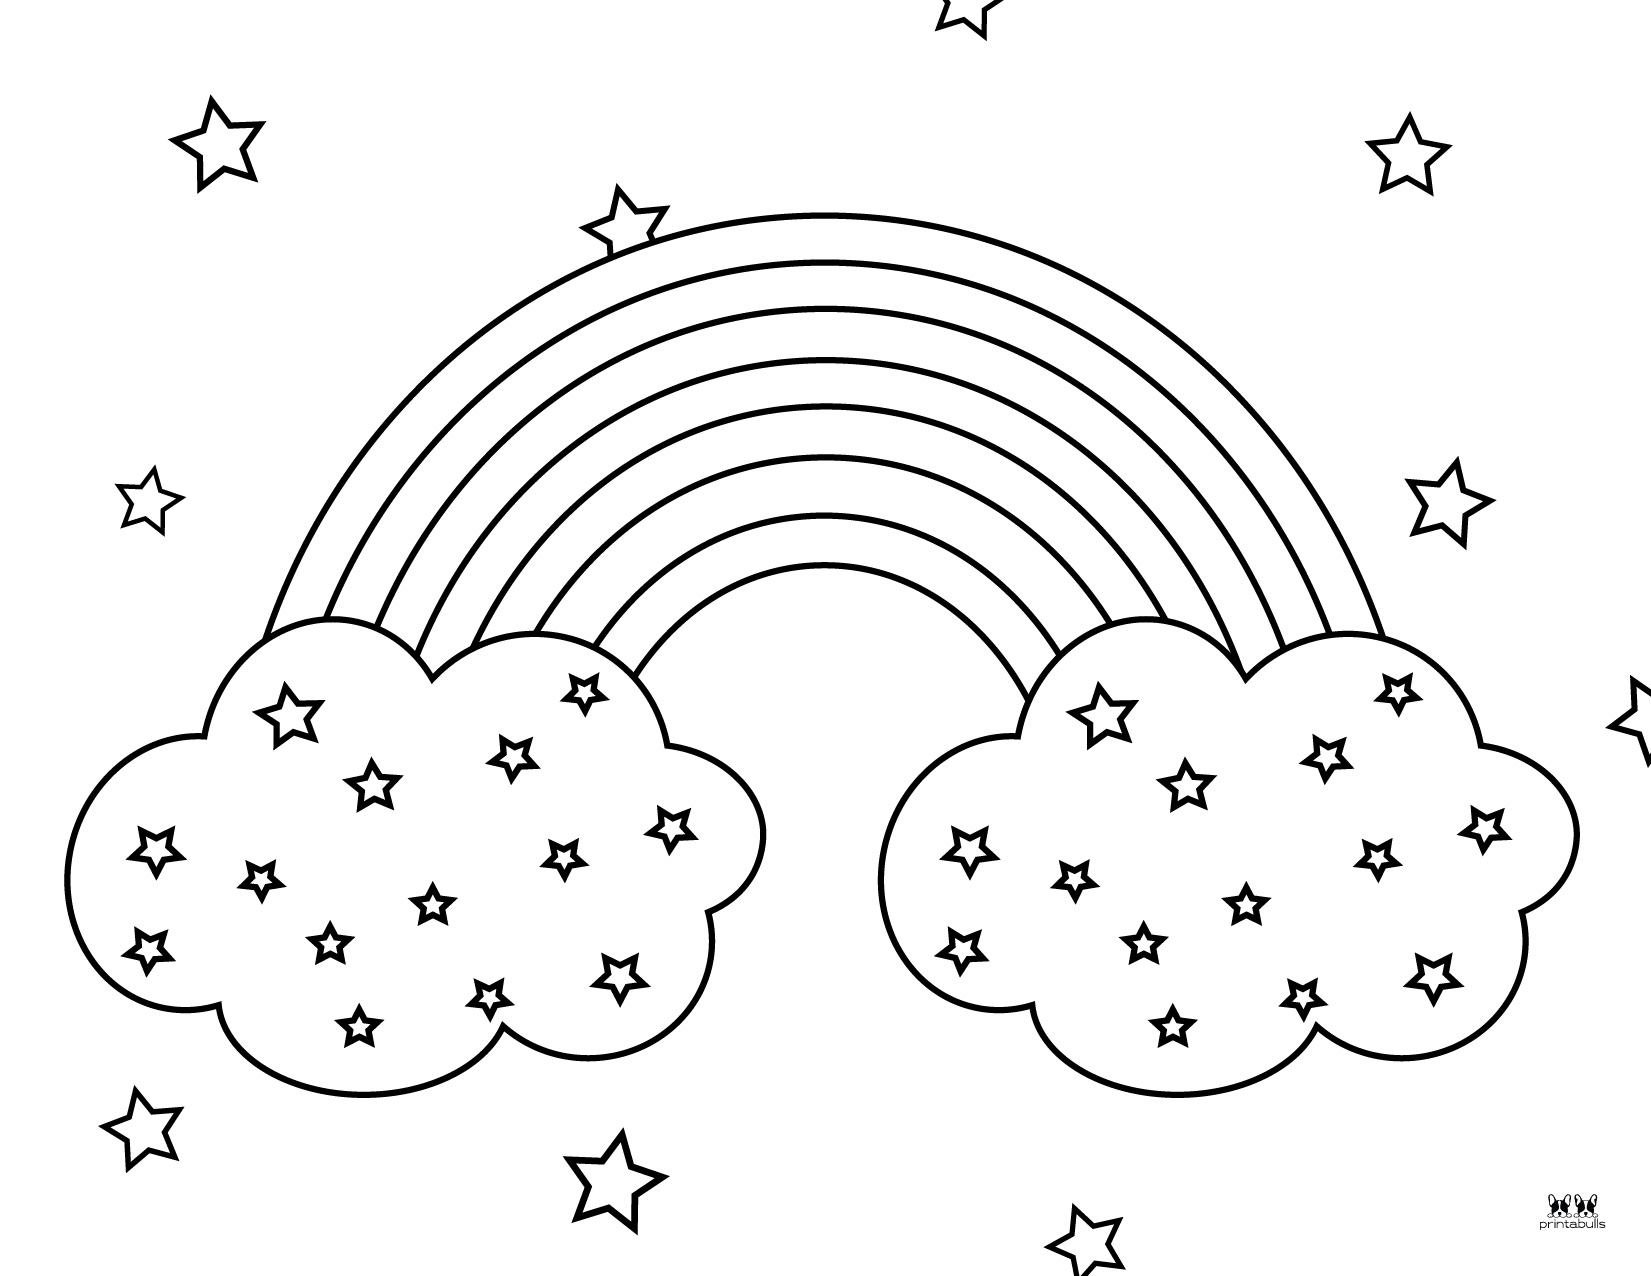 Rainbow Coloring Page Printable Coloring Pages Rainbow Days | Images ...